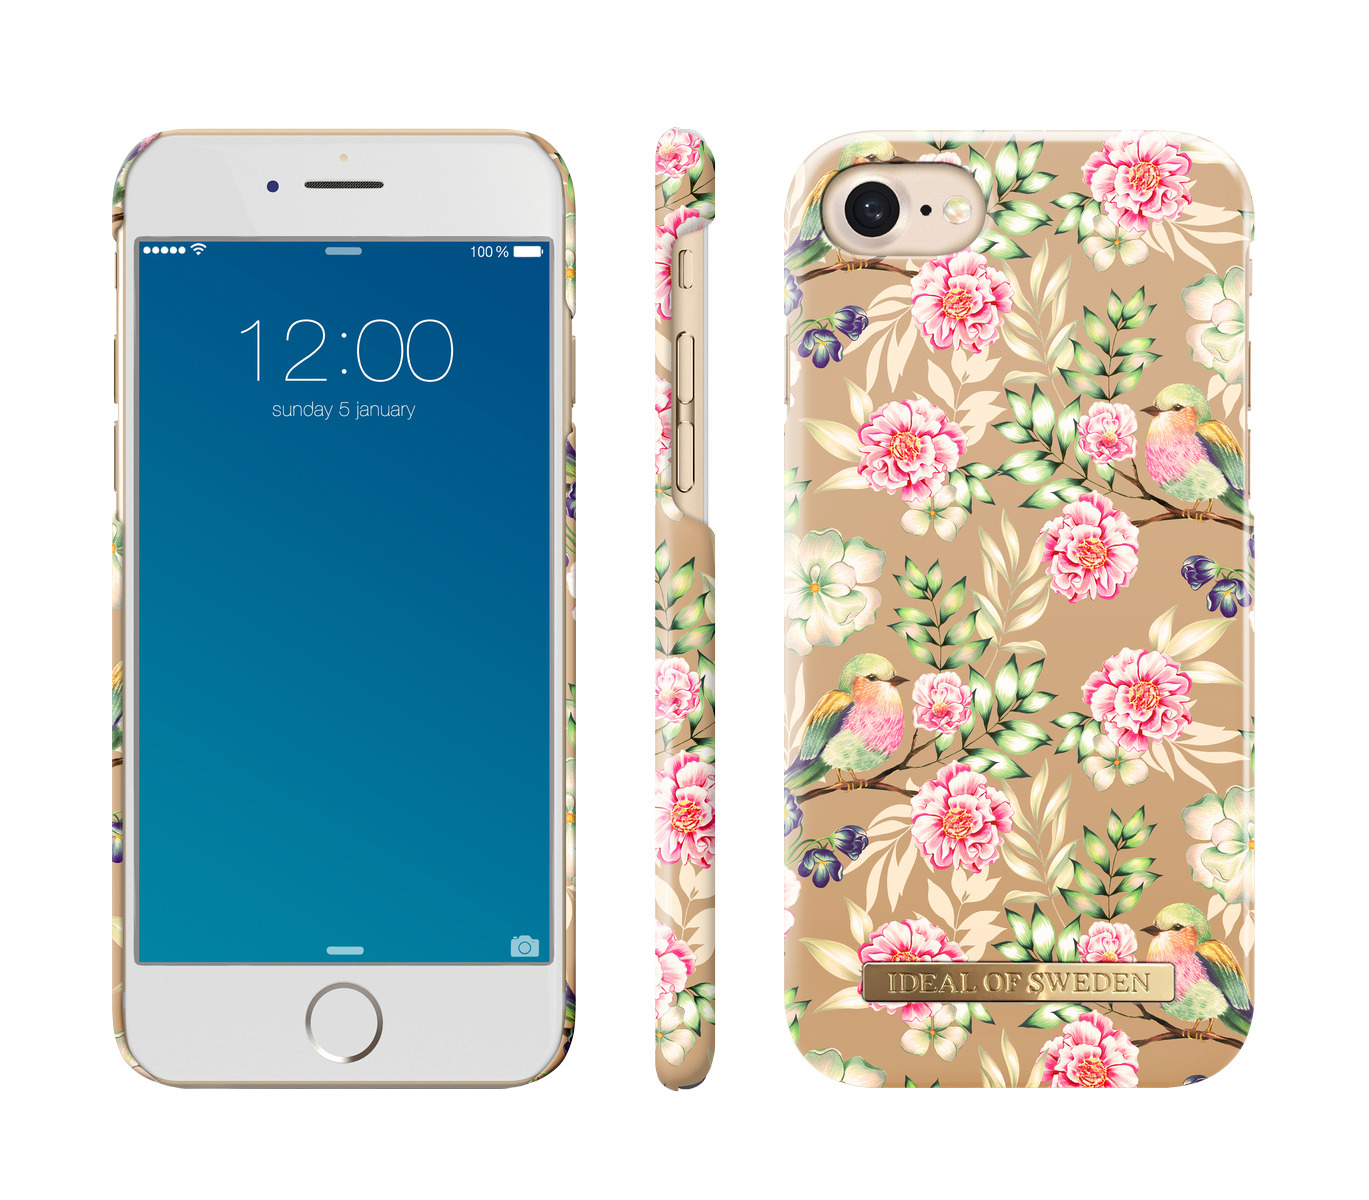 IDEAL OF SWEDEN Fashion, iPhone 6, Champagne Birds 8, iPhone Apple, 7, Backcover, iPhone